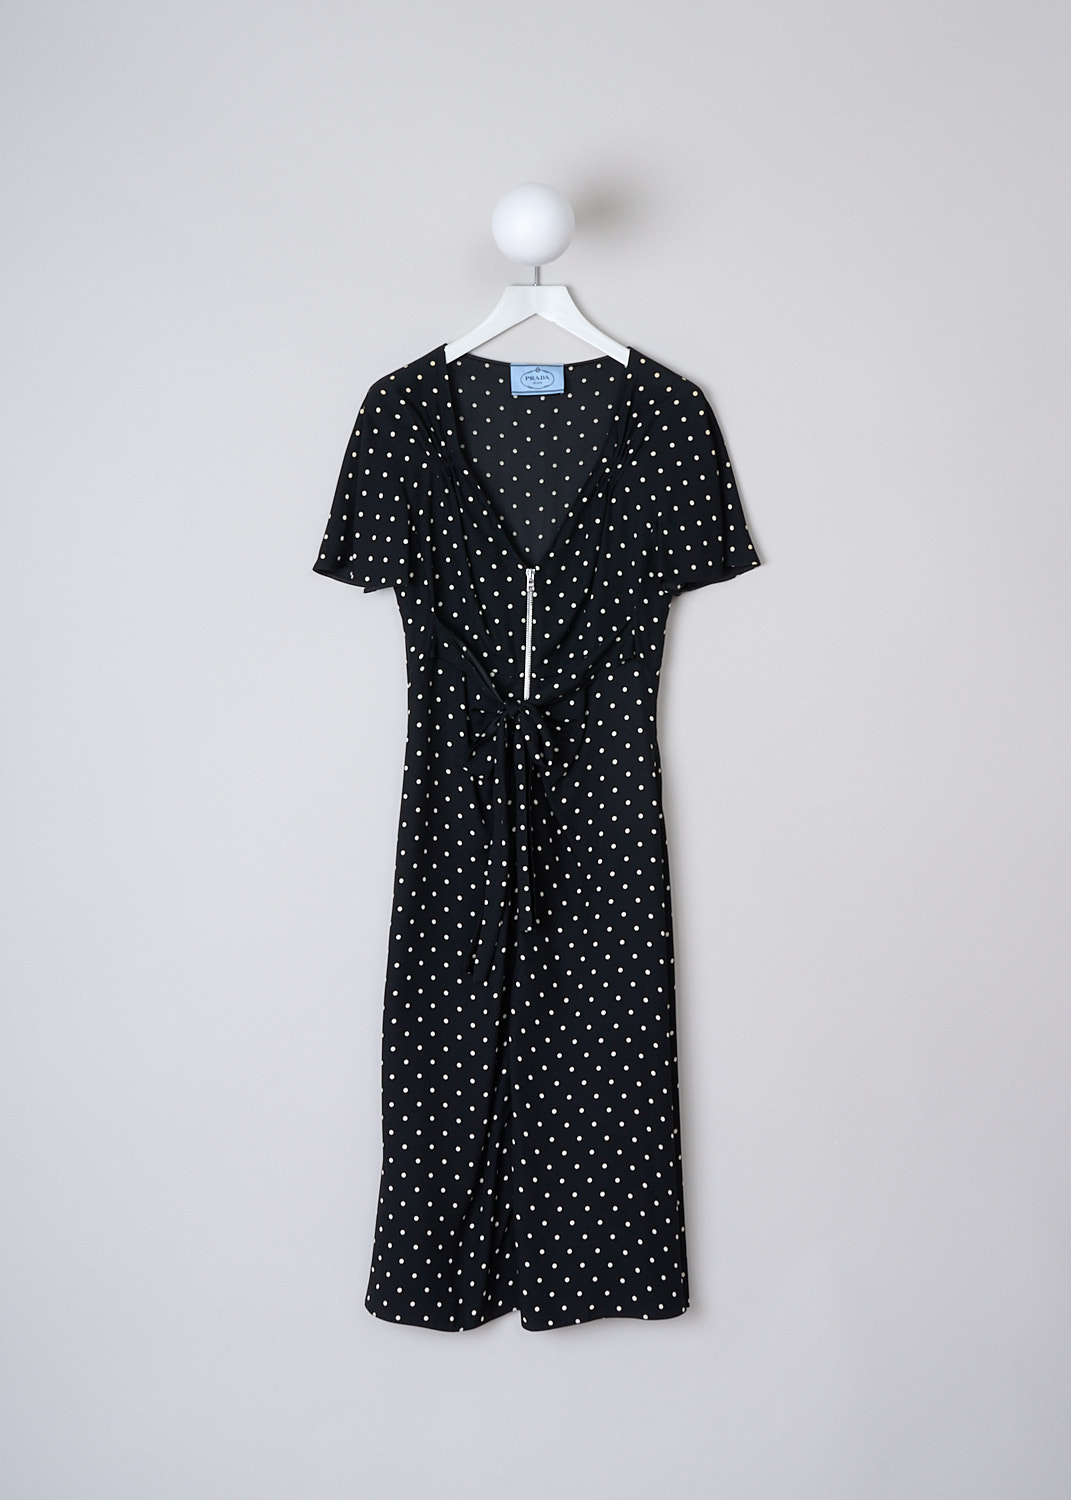 PRADA, BLACK MIDI DRESS WITH WHITE POLKA DOT PRINT, SABLE_POIS_ABITO_P3D14_1YH2_F057Z,  Black, White, Print, Front, This short sleeve midi dress has a black base color with a small white polka dot print. The dress has a V-neckline. In the front, a two-way zip runs down the length of the dress with gathered pleats along the zipper. Below the buste, two ties can be used to cinch in the dress. The dress has a straight hemline.


